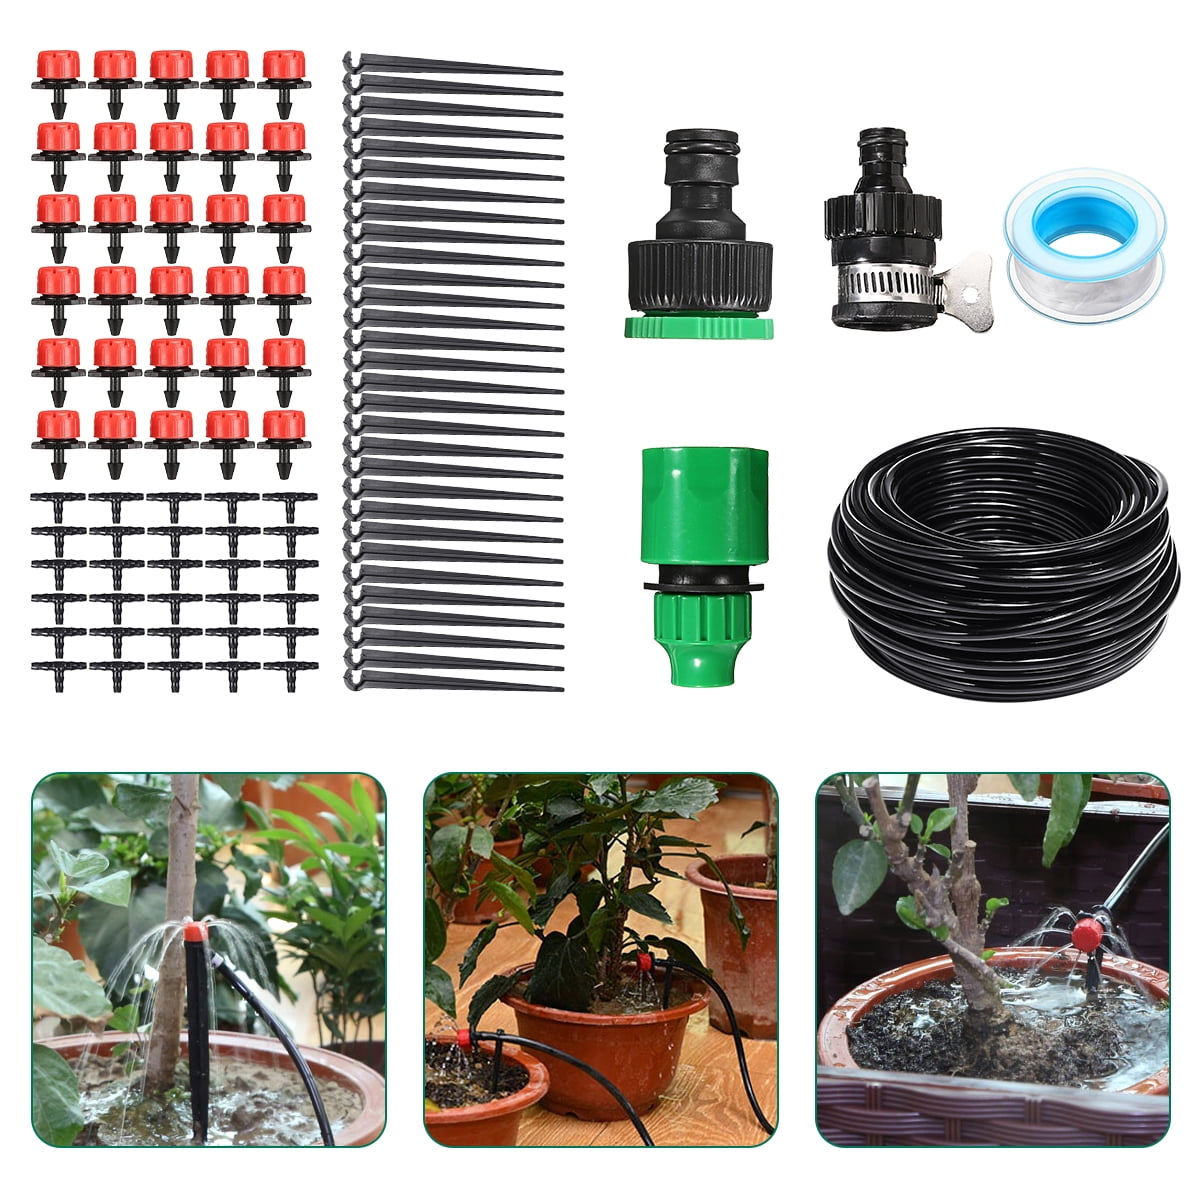 Details about   Drip Irrigation System Plant Timer Self Garden Watering Hose Spray Kit 